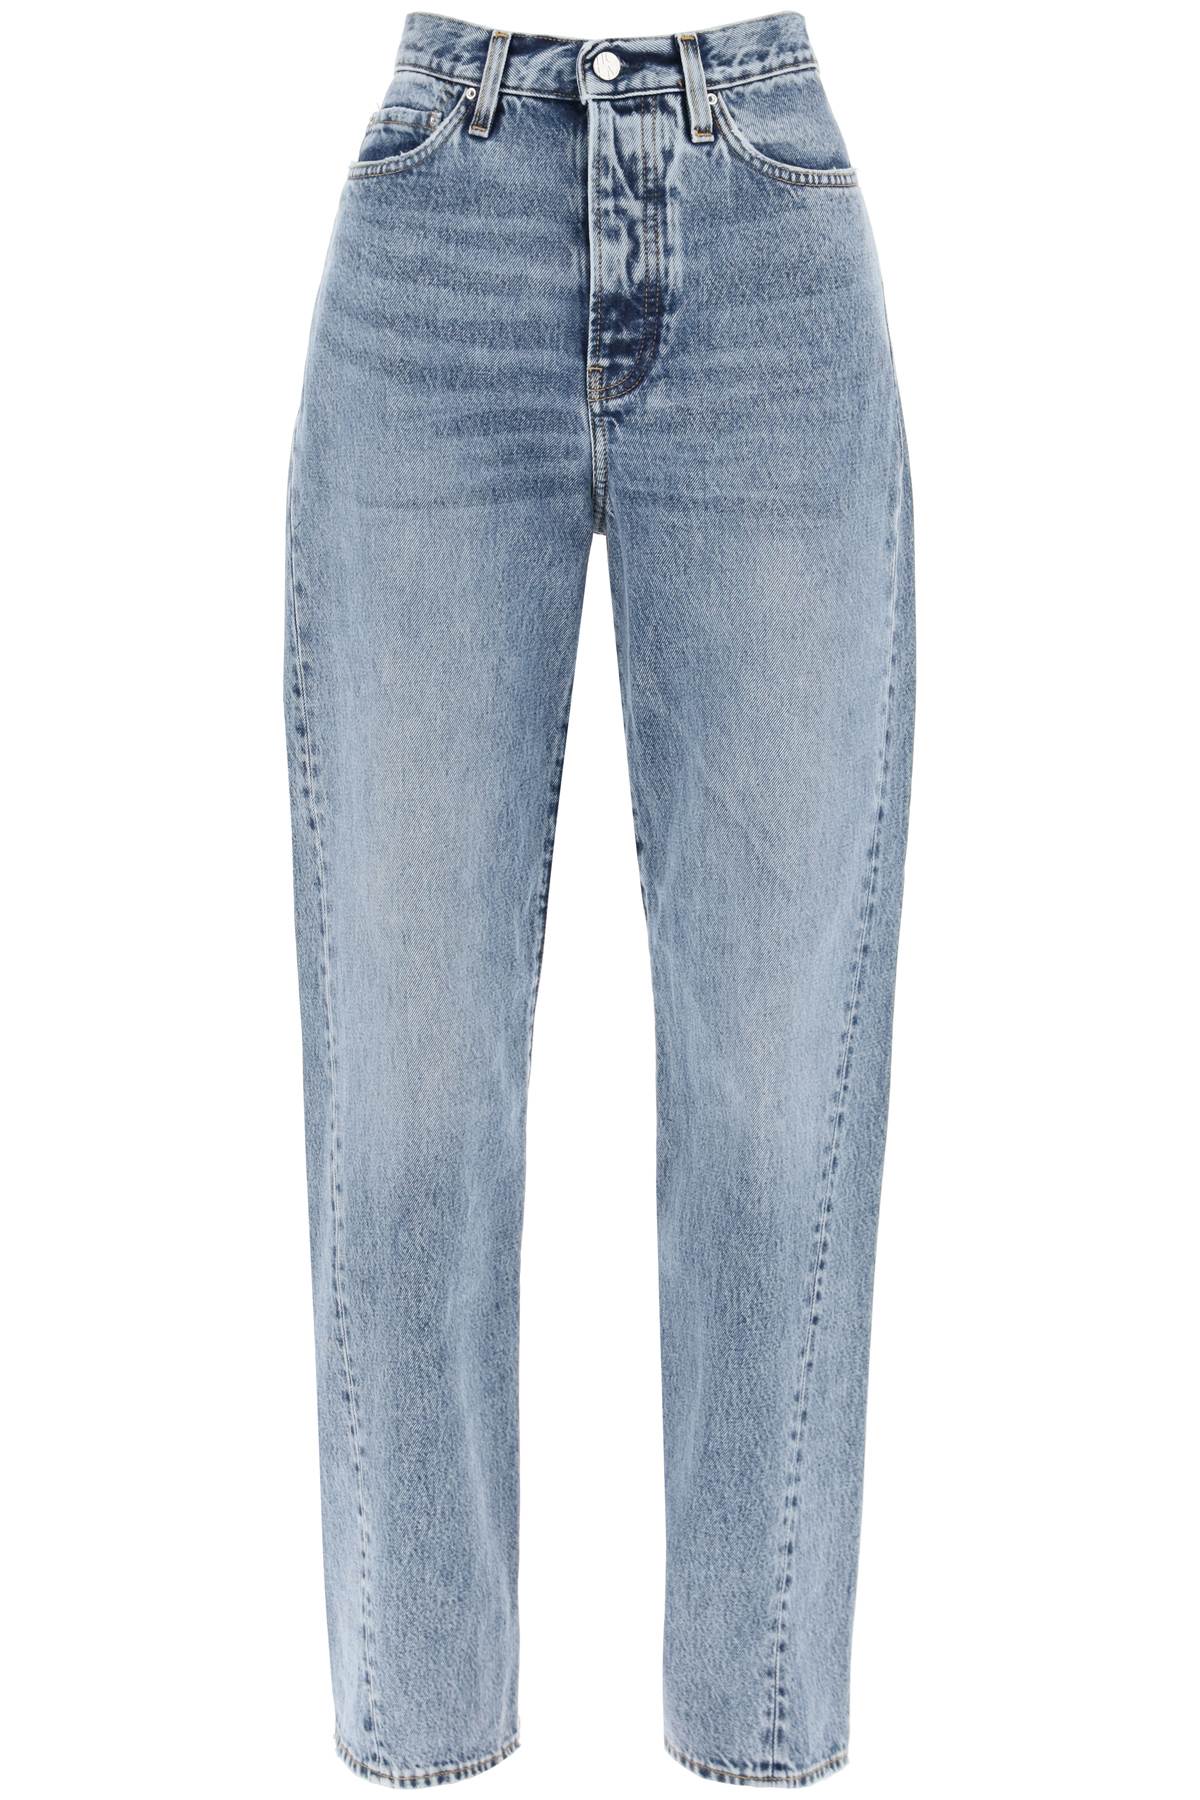 Toteme TOTEME twisted seam straight jeans